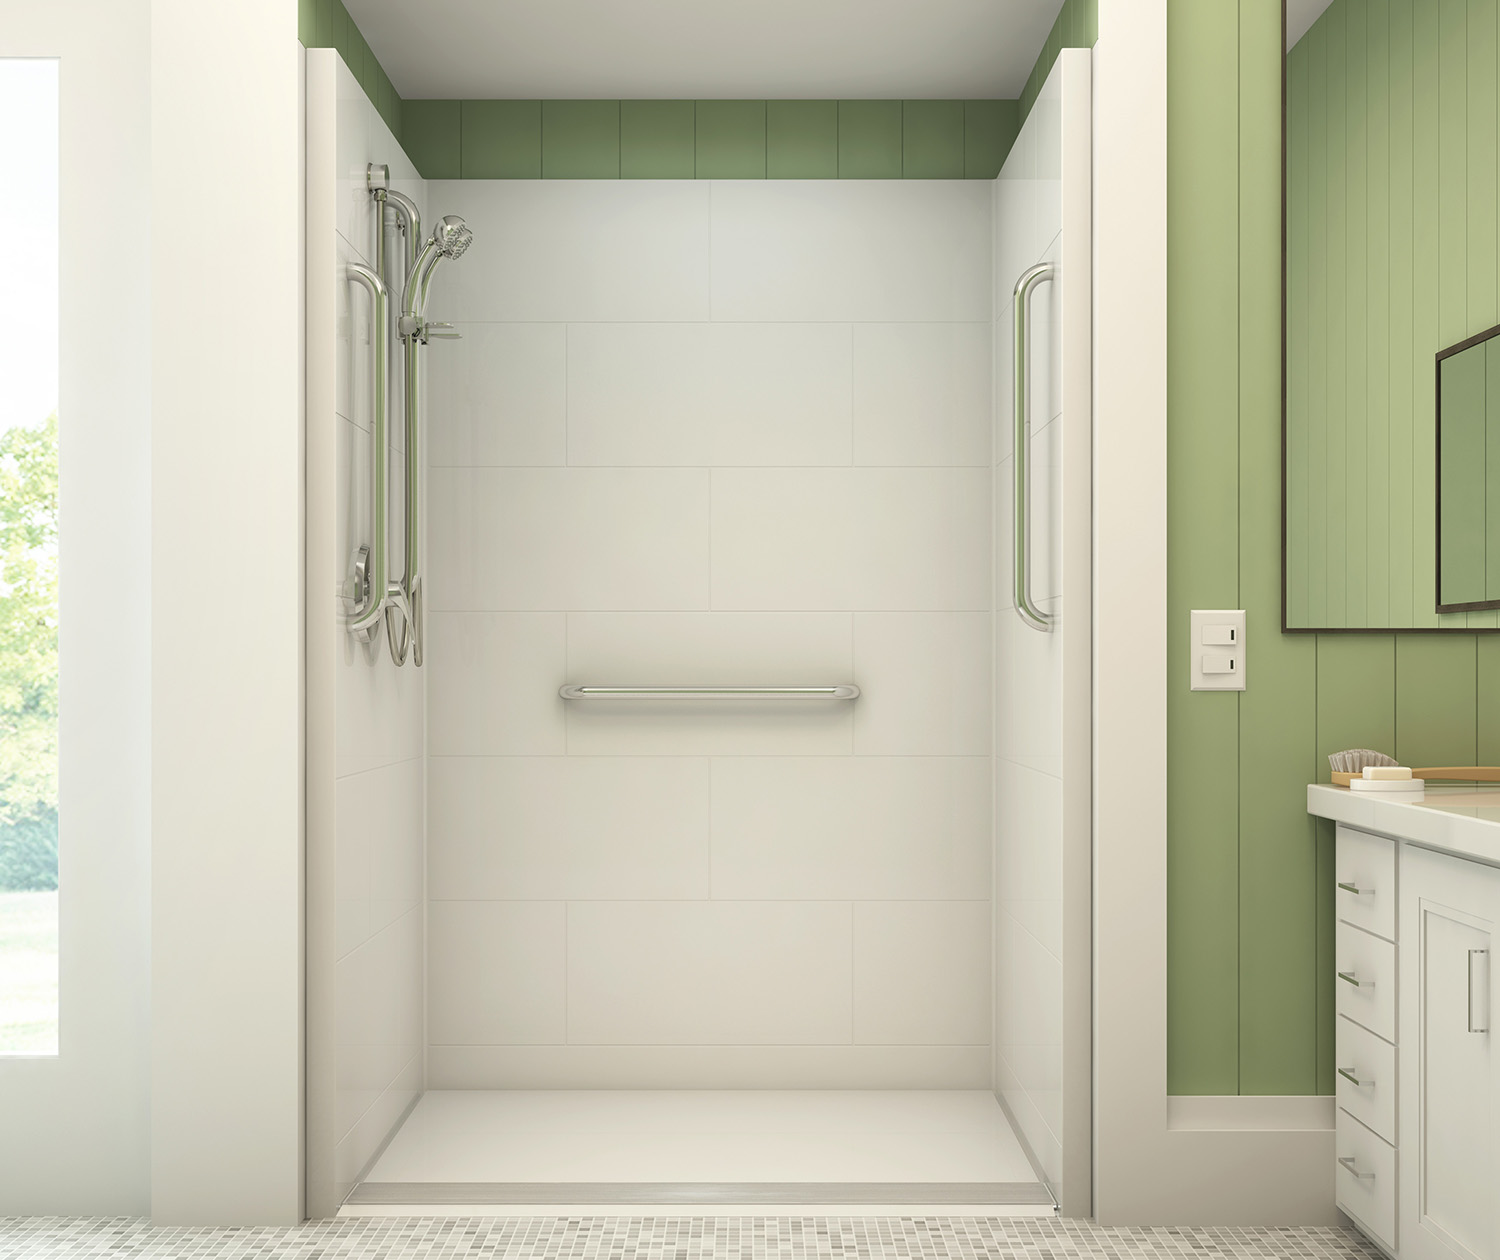 48 X 36 Shower Stall + Built-in Seat